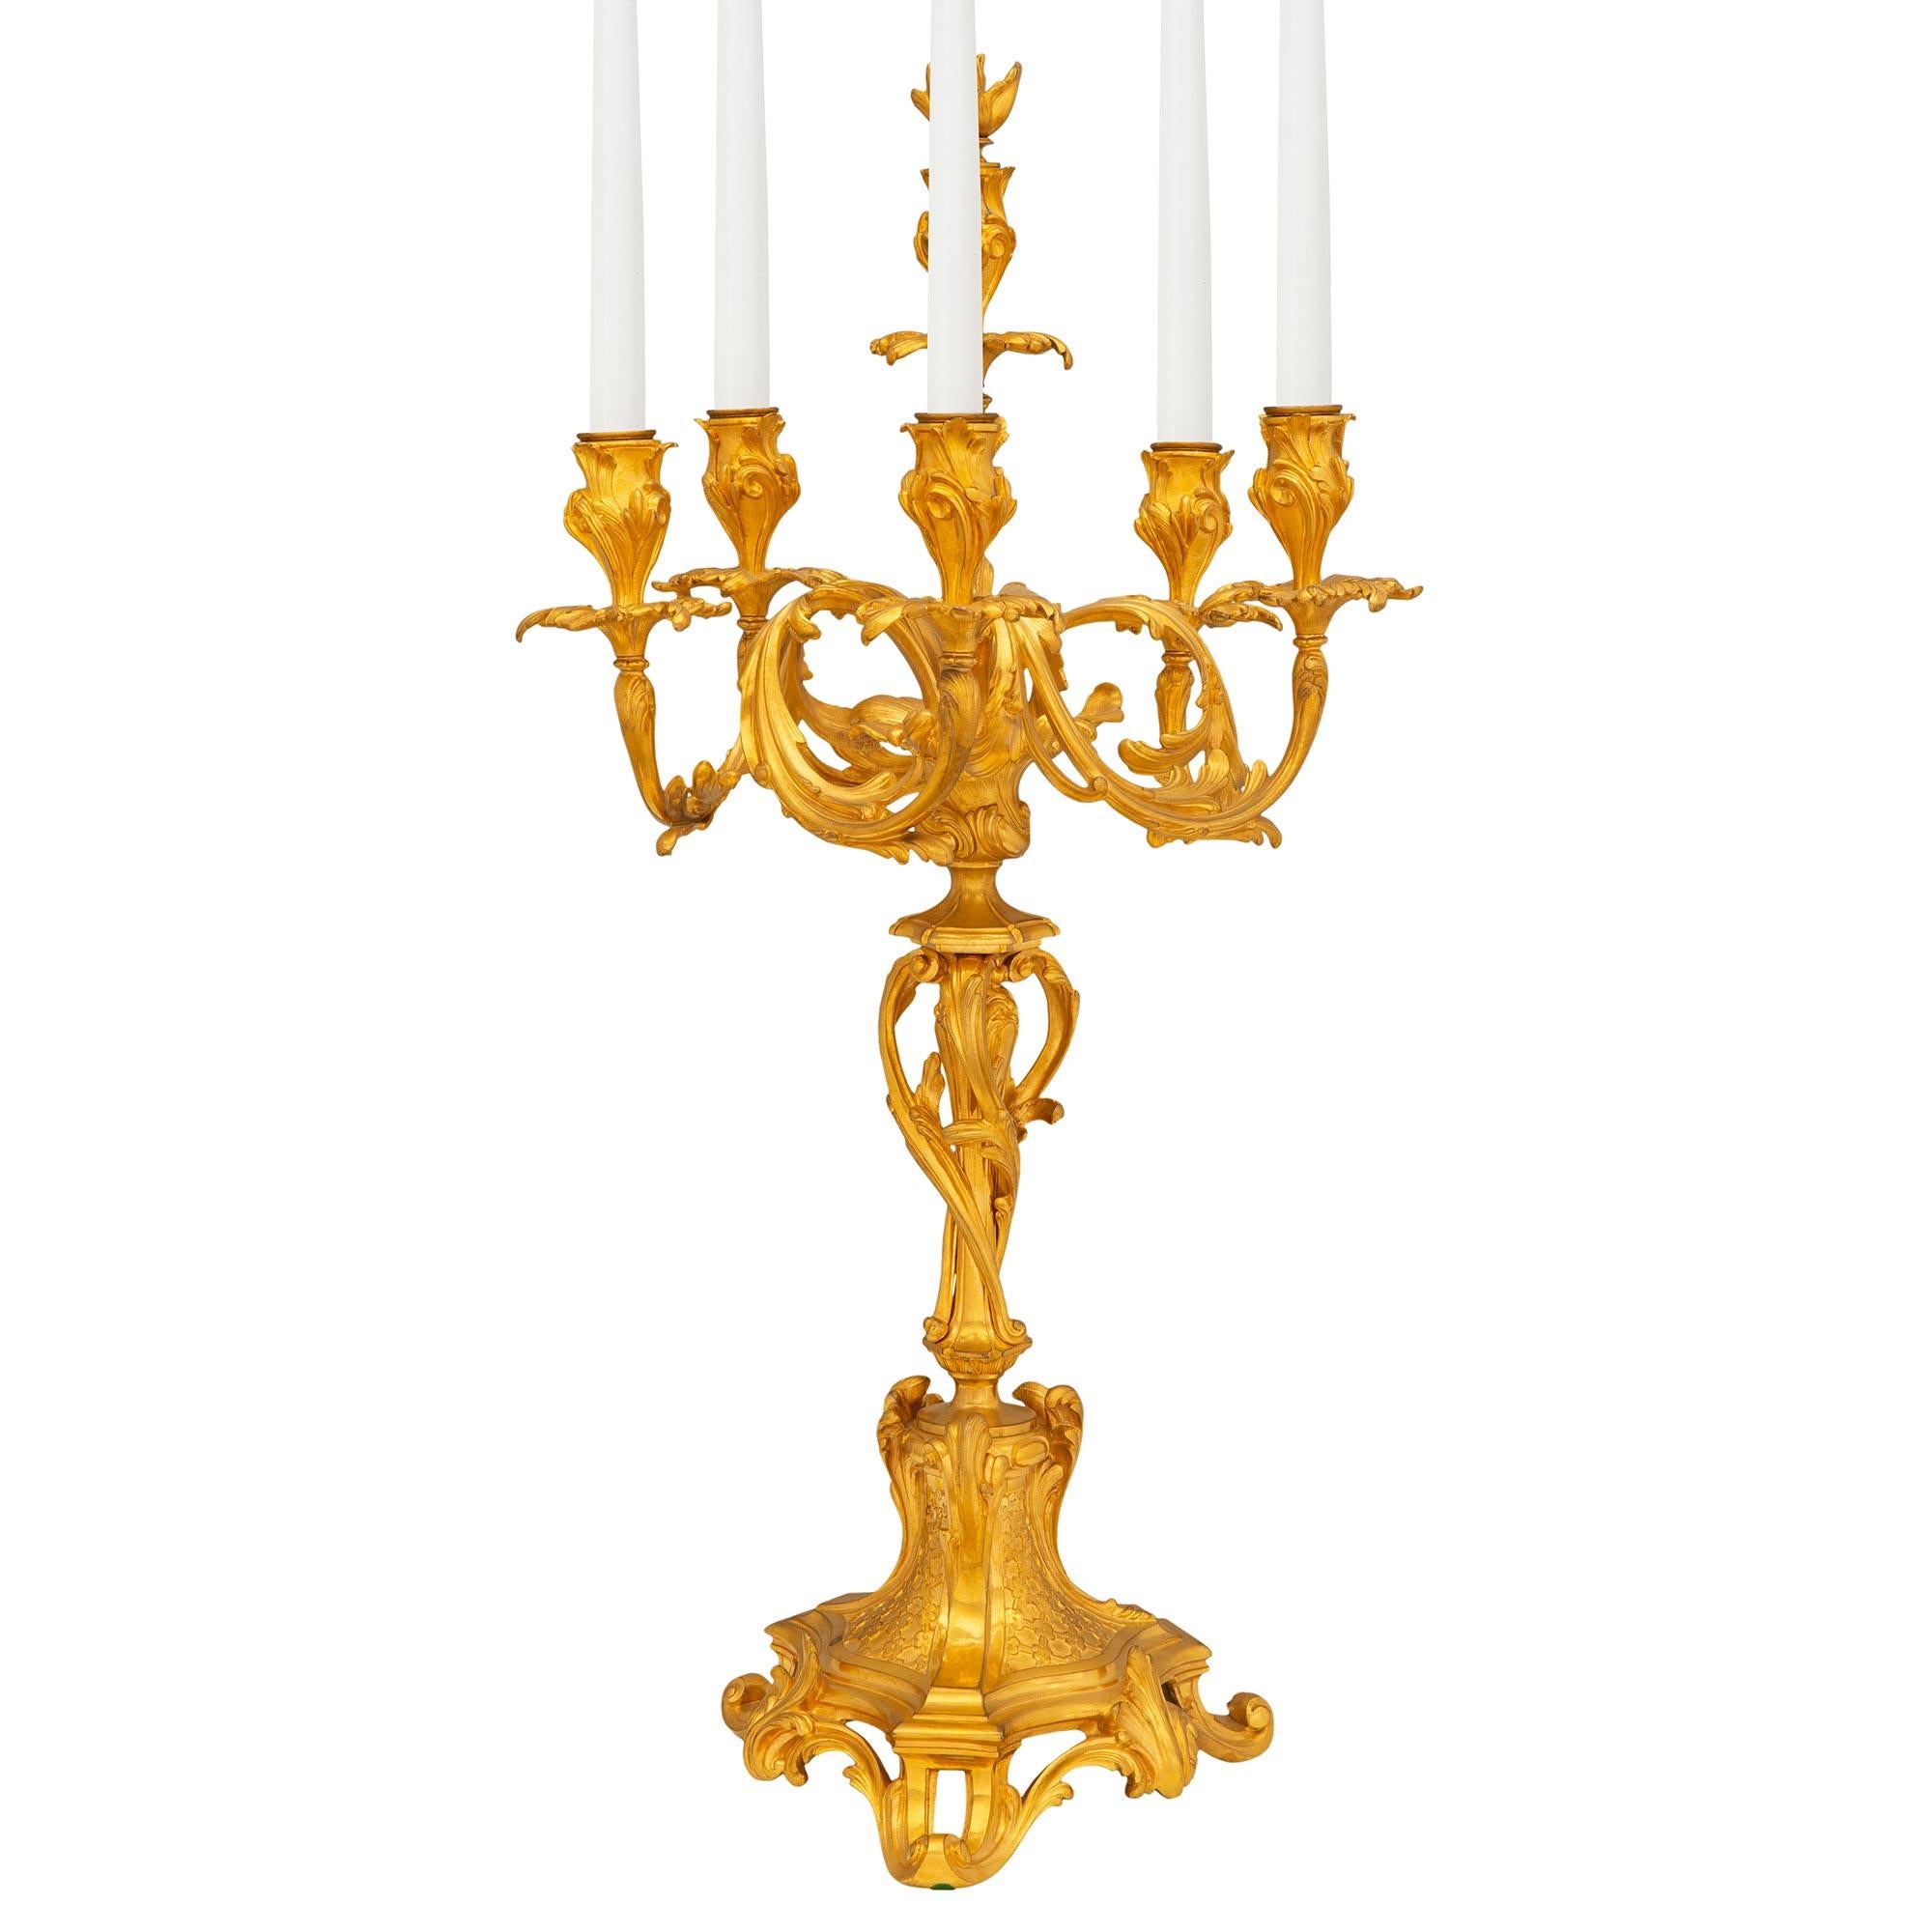 A striking and high quality pair of French 19th century Louis XV st. ormolu candelabras. Each six arm candelabra is raised by a beautiful pierced base with a scalloped triangular shape, fine scrolled foliate feet, beautiful central leaf and